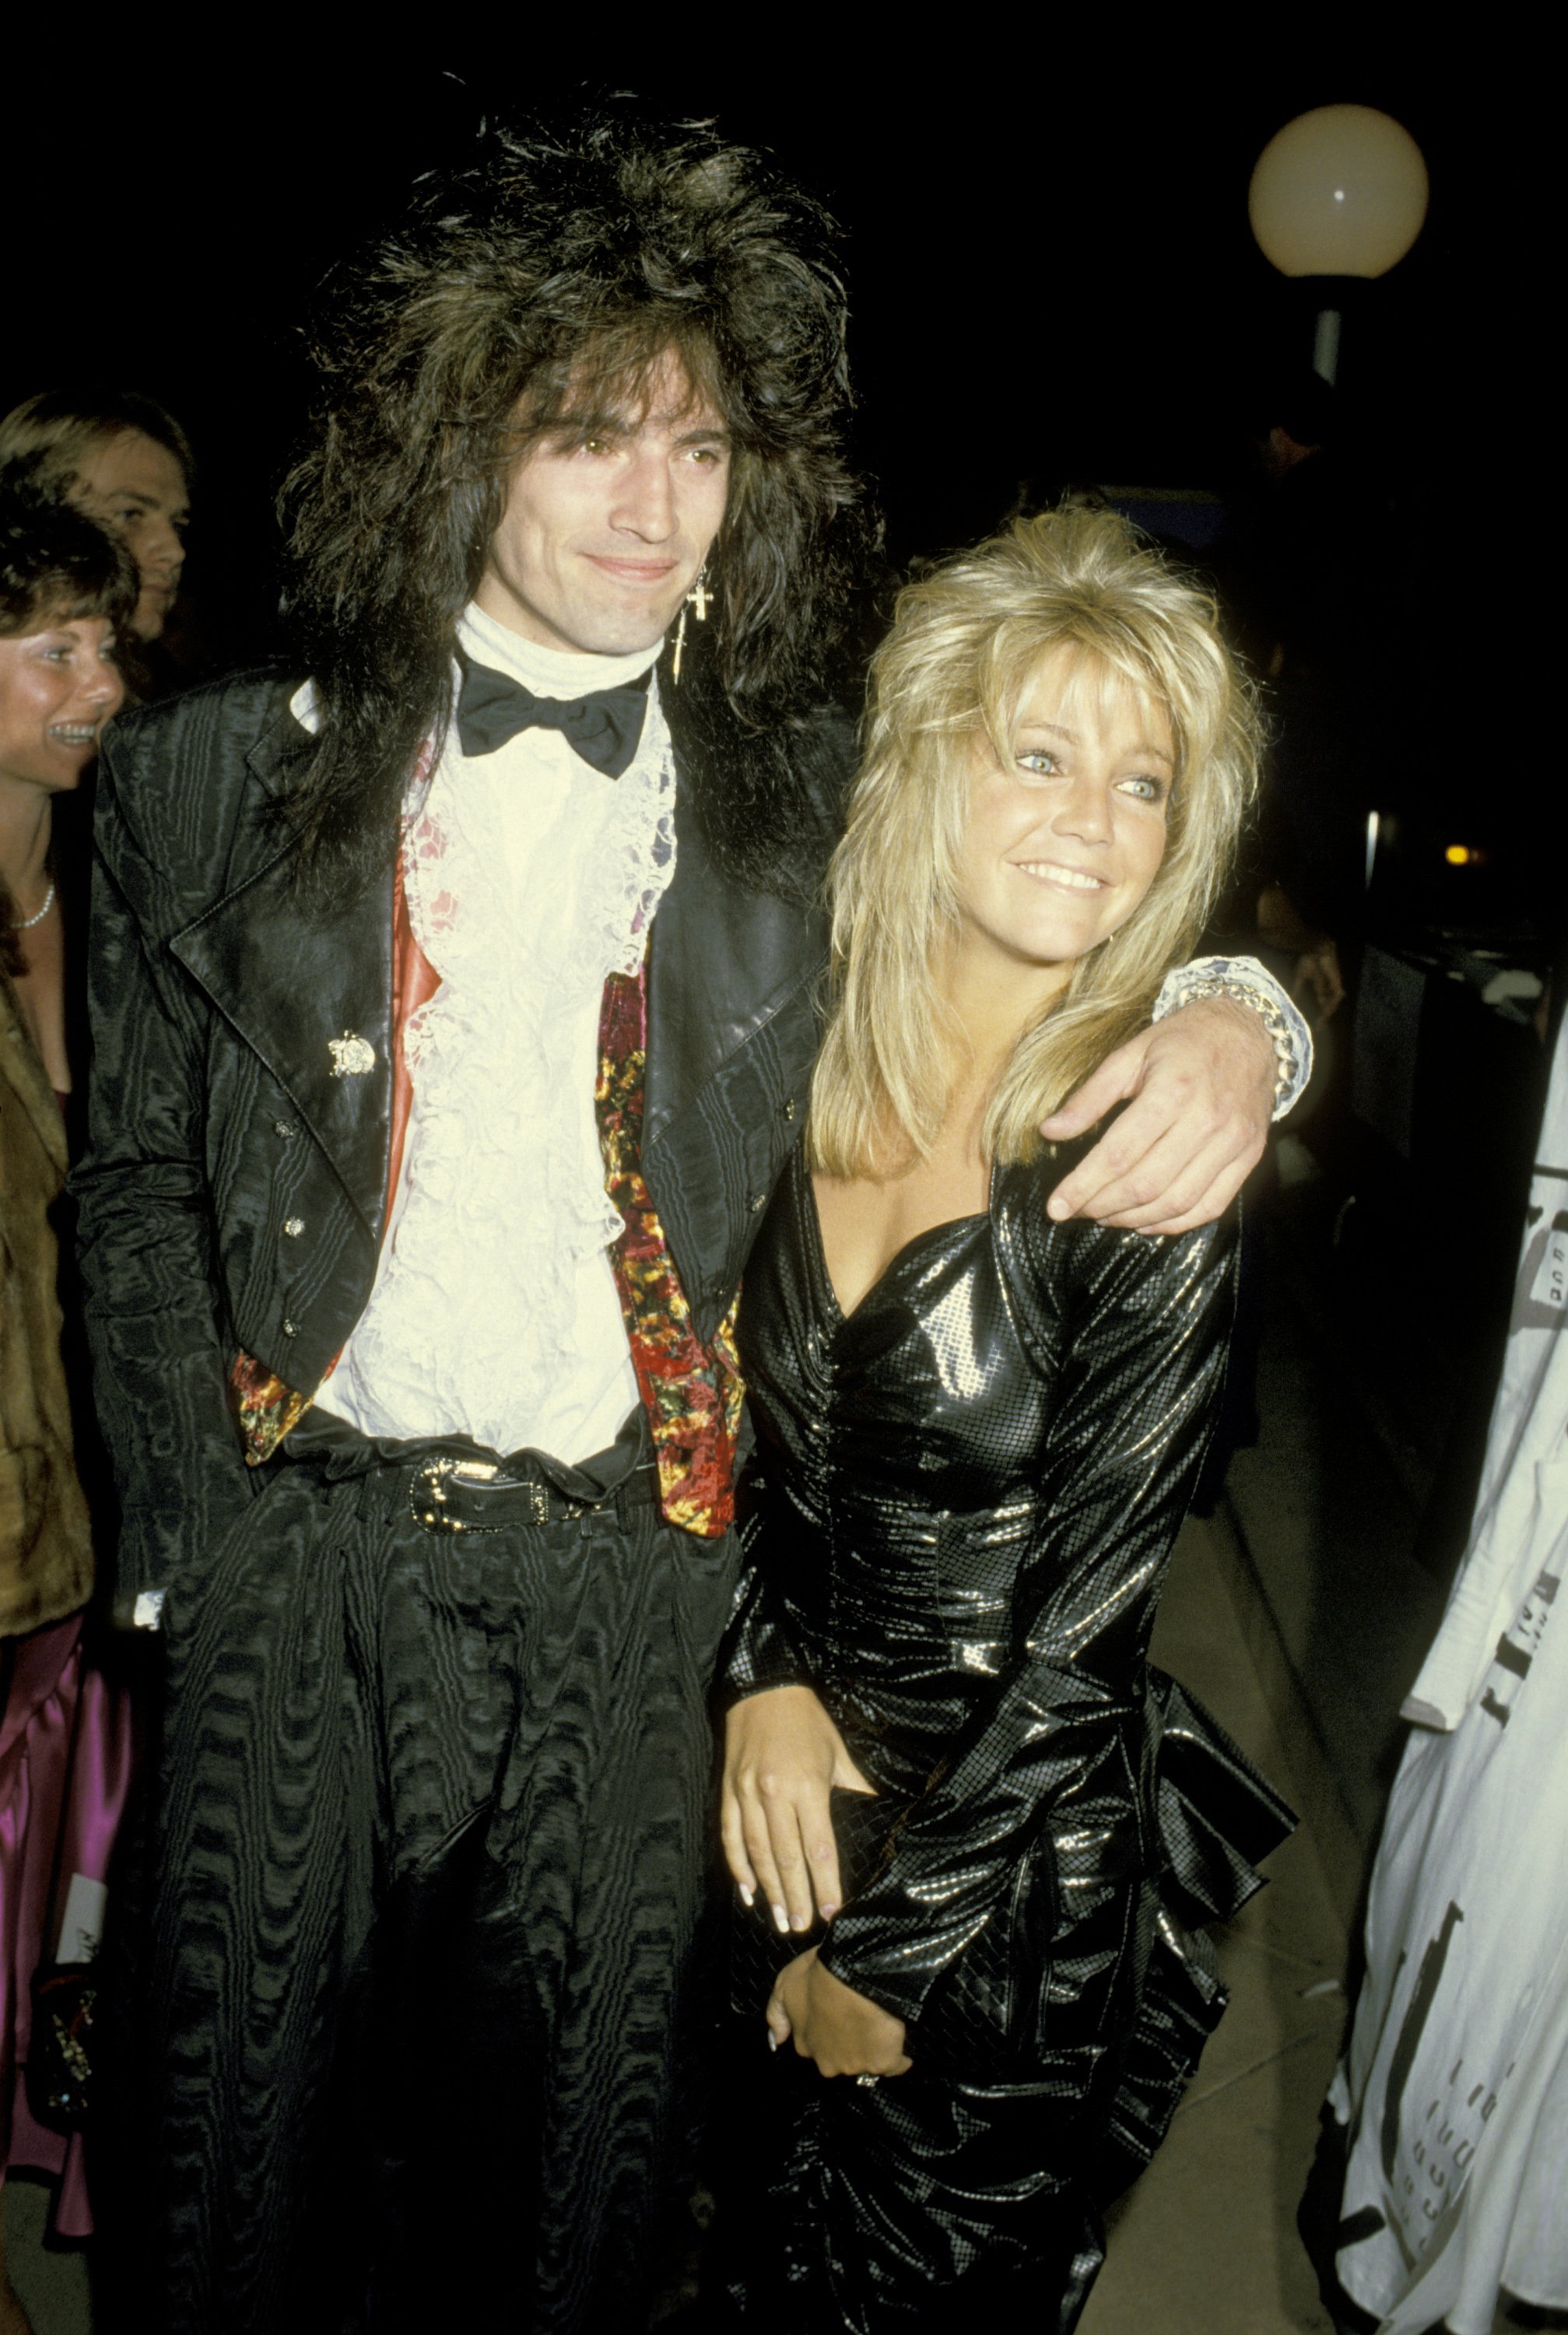 Tommy Lee posing with his arm around Heather Locklear at an event in 1986